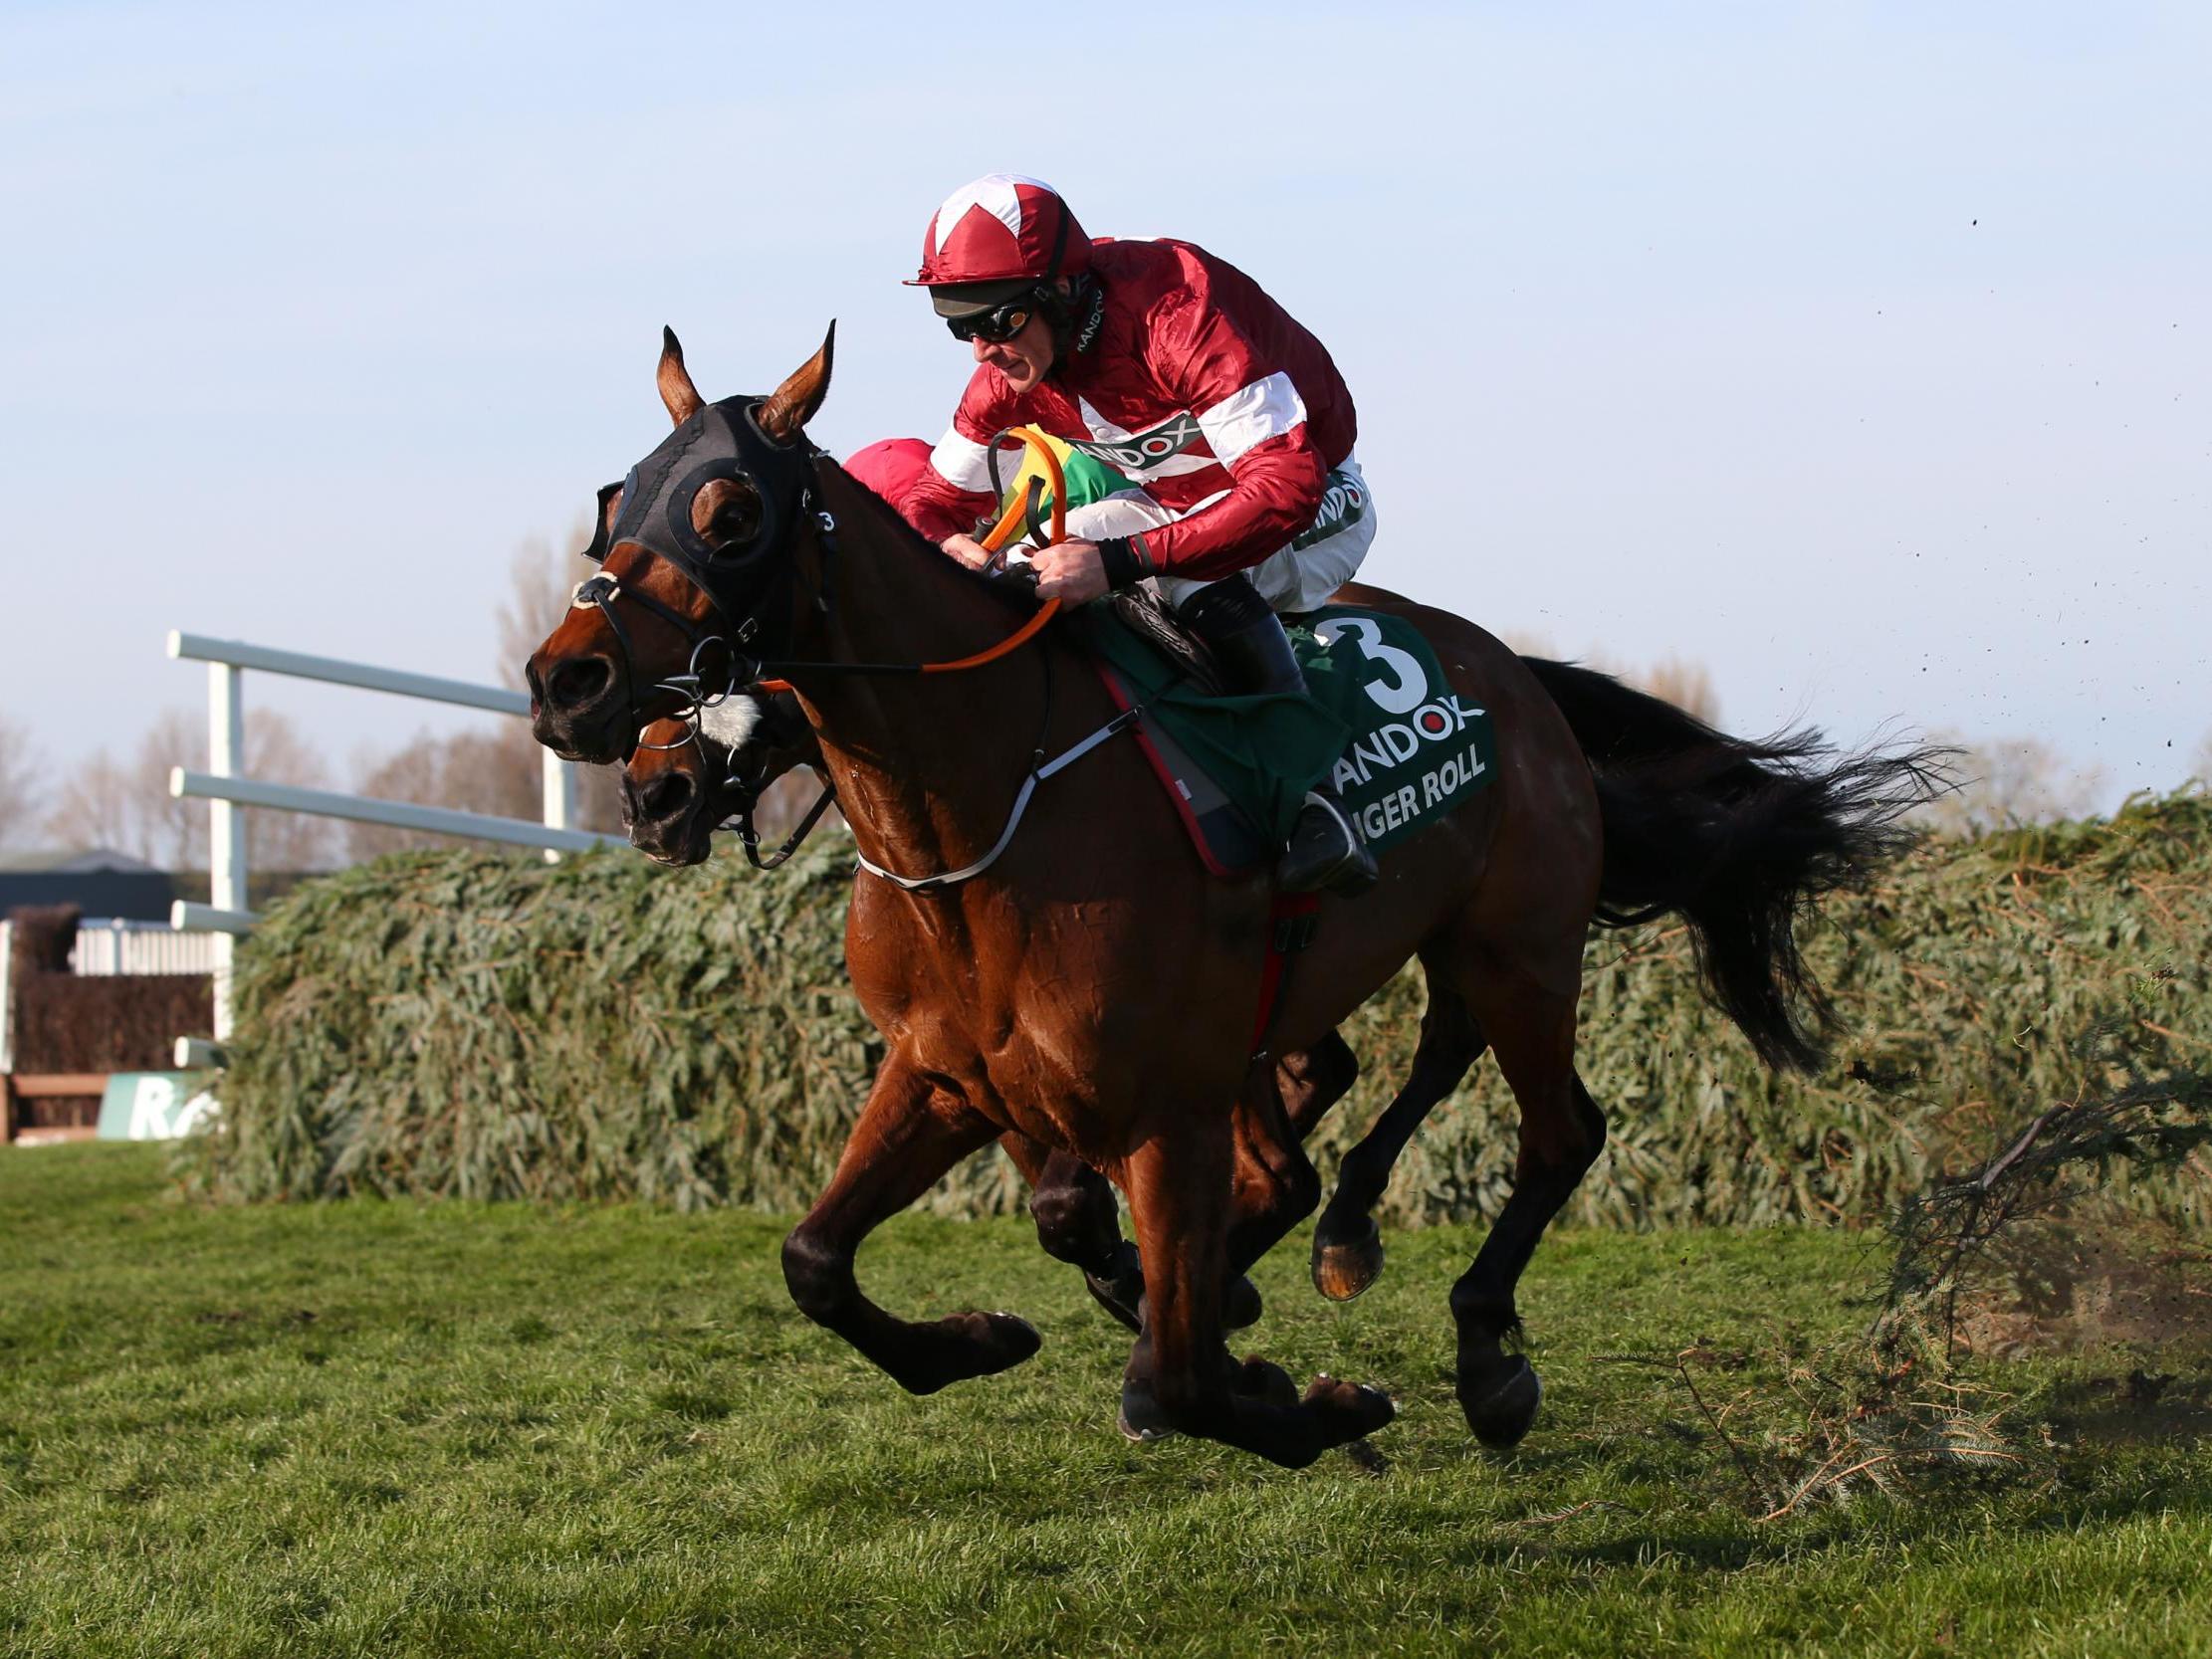 &#13;
Davy Russell rides Tiger Roll to victory at Aintree &#13;